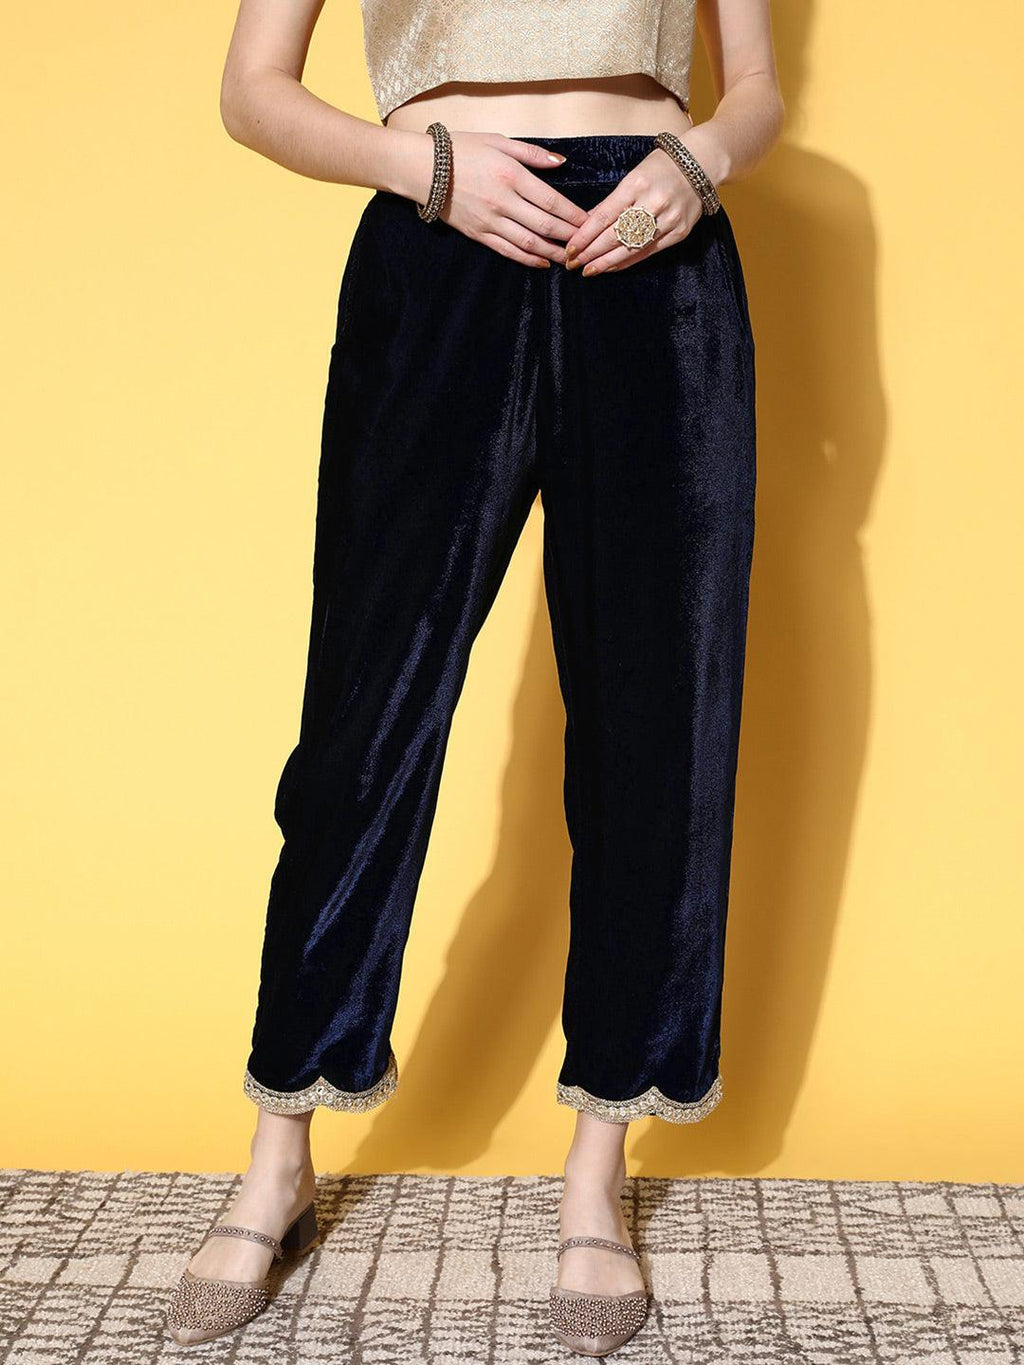 Details more than 135 velour trousers latest